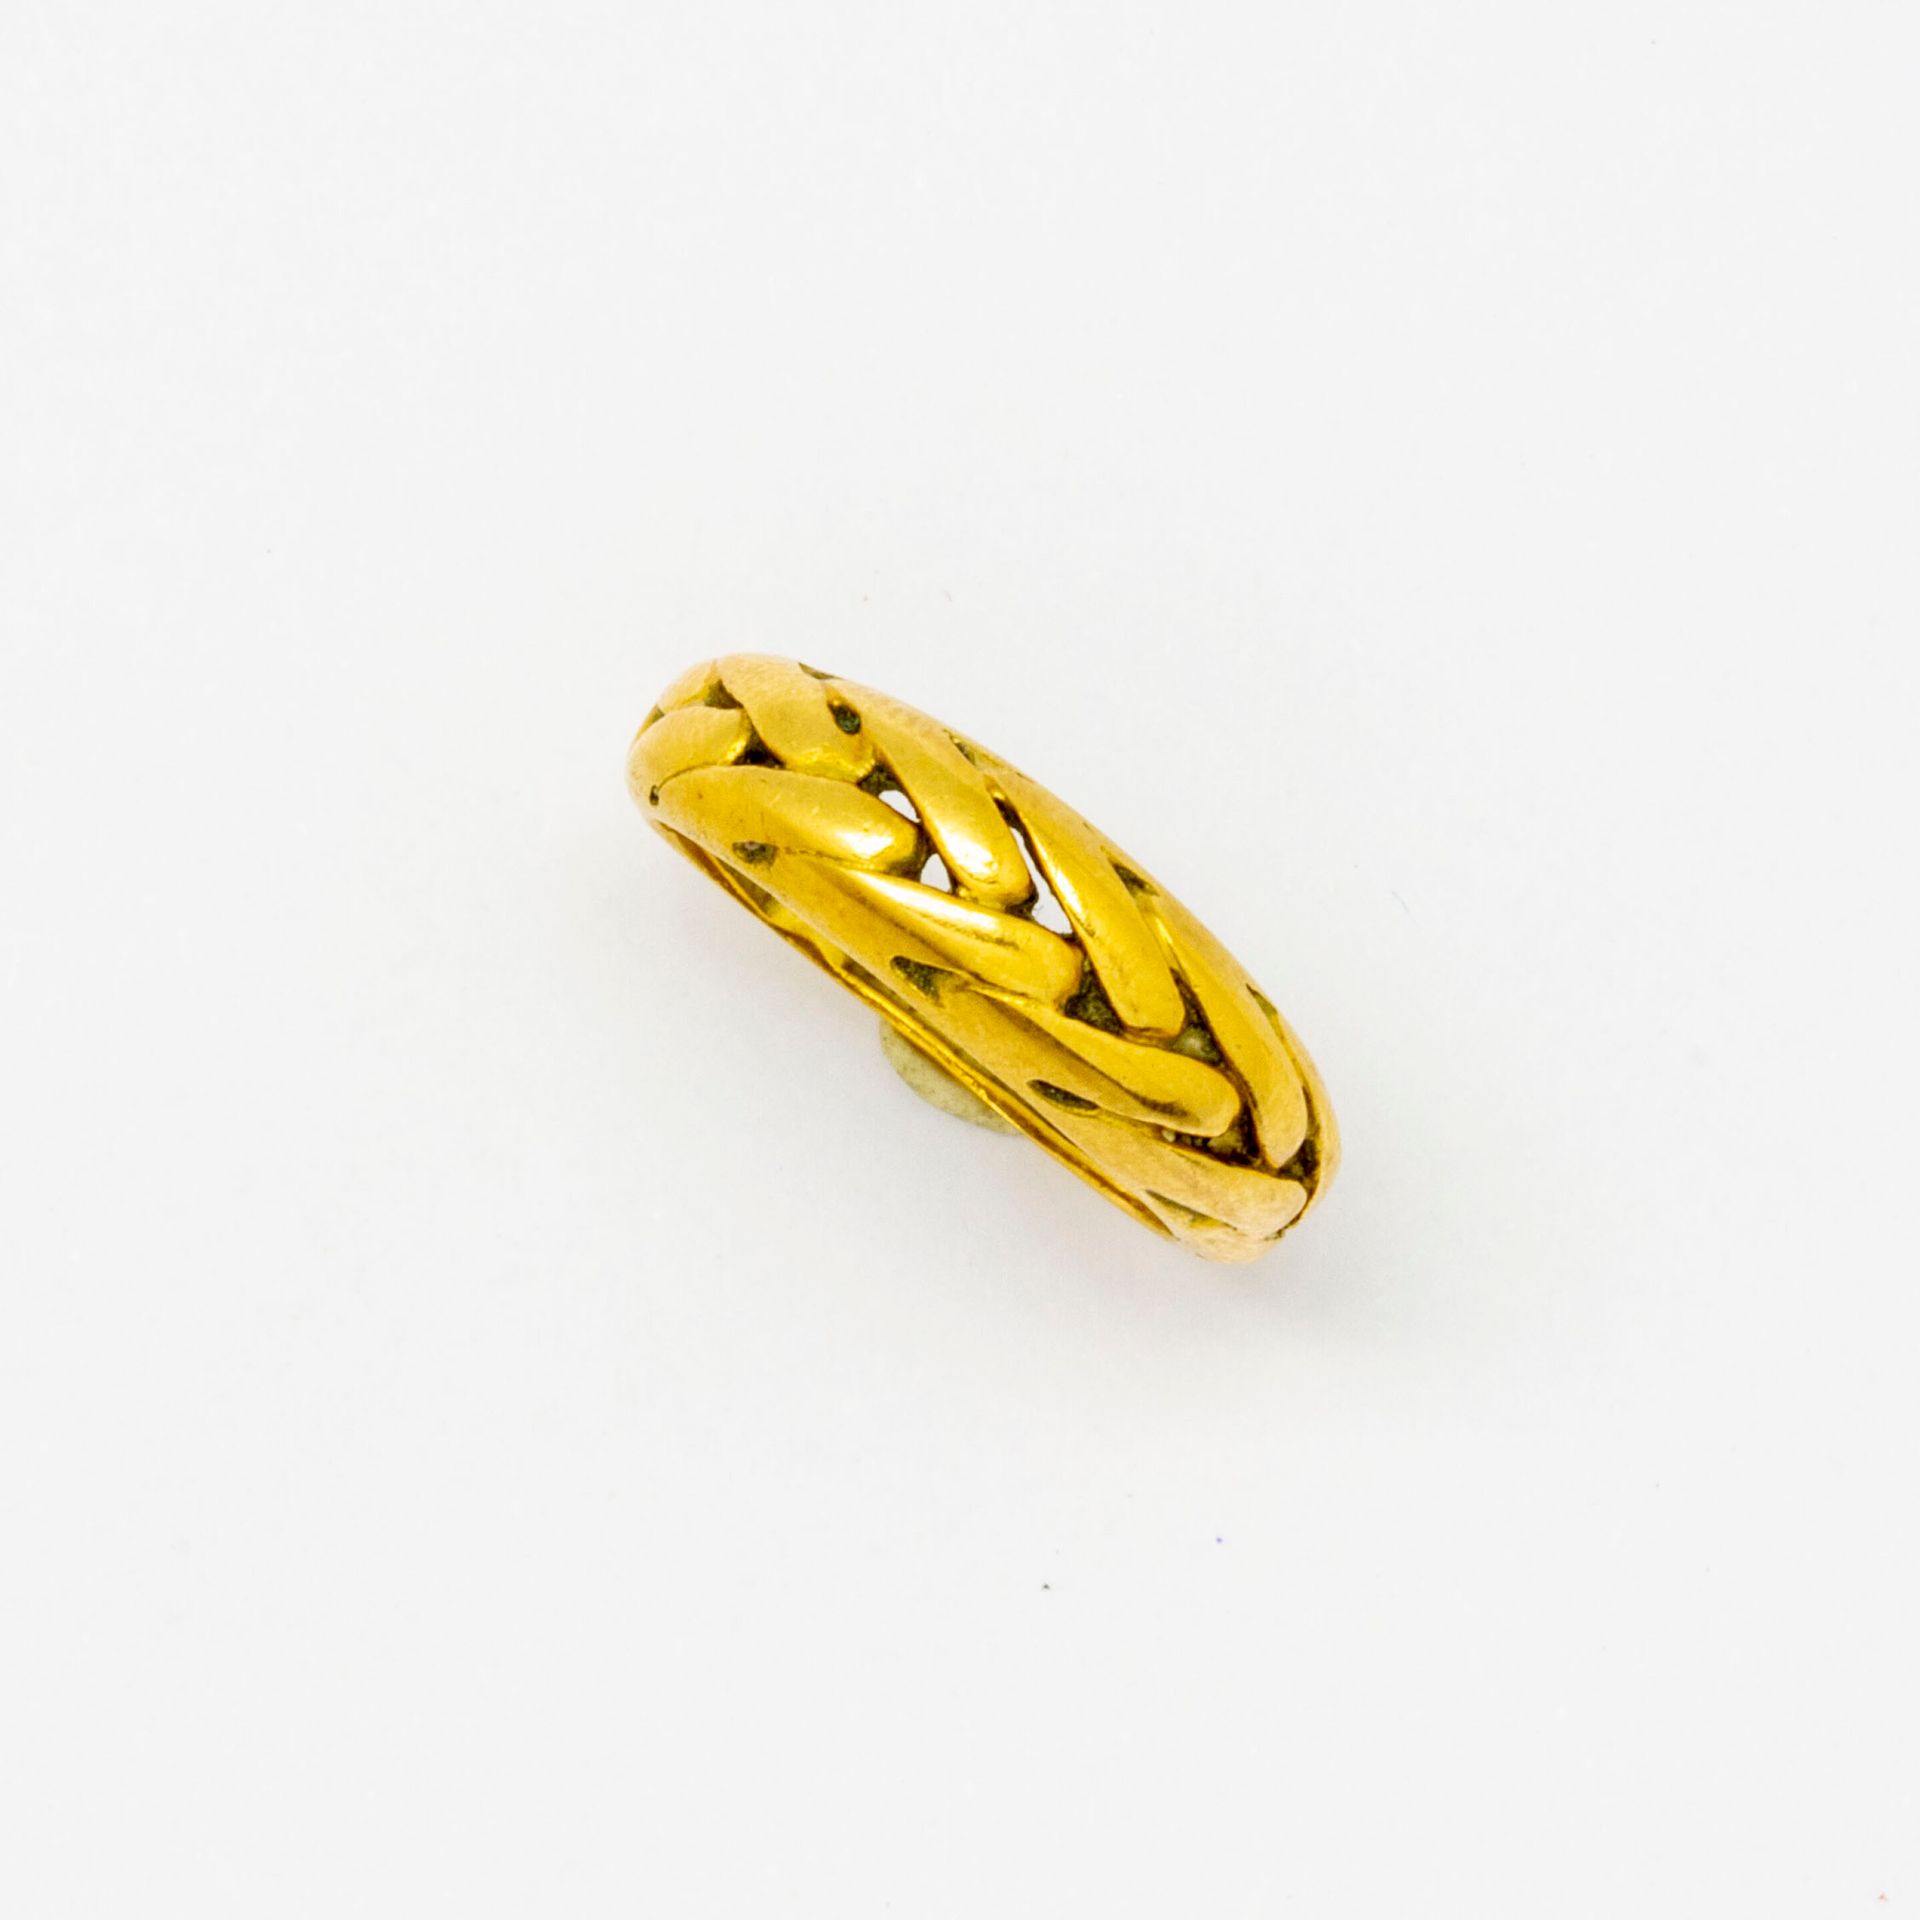 Null Yellow gold ring with ears of corn motif

weight : 3,5 g